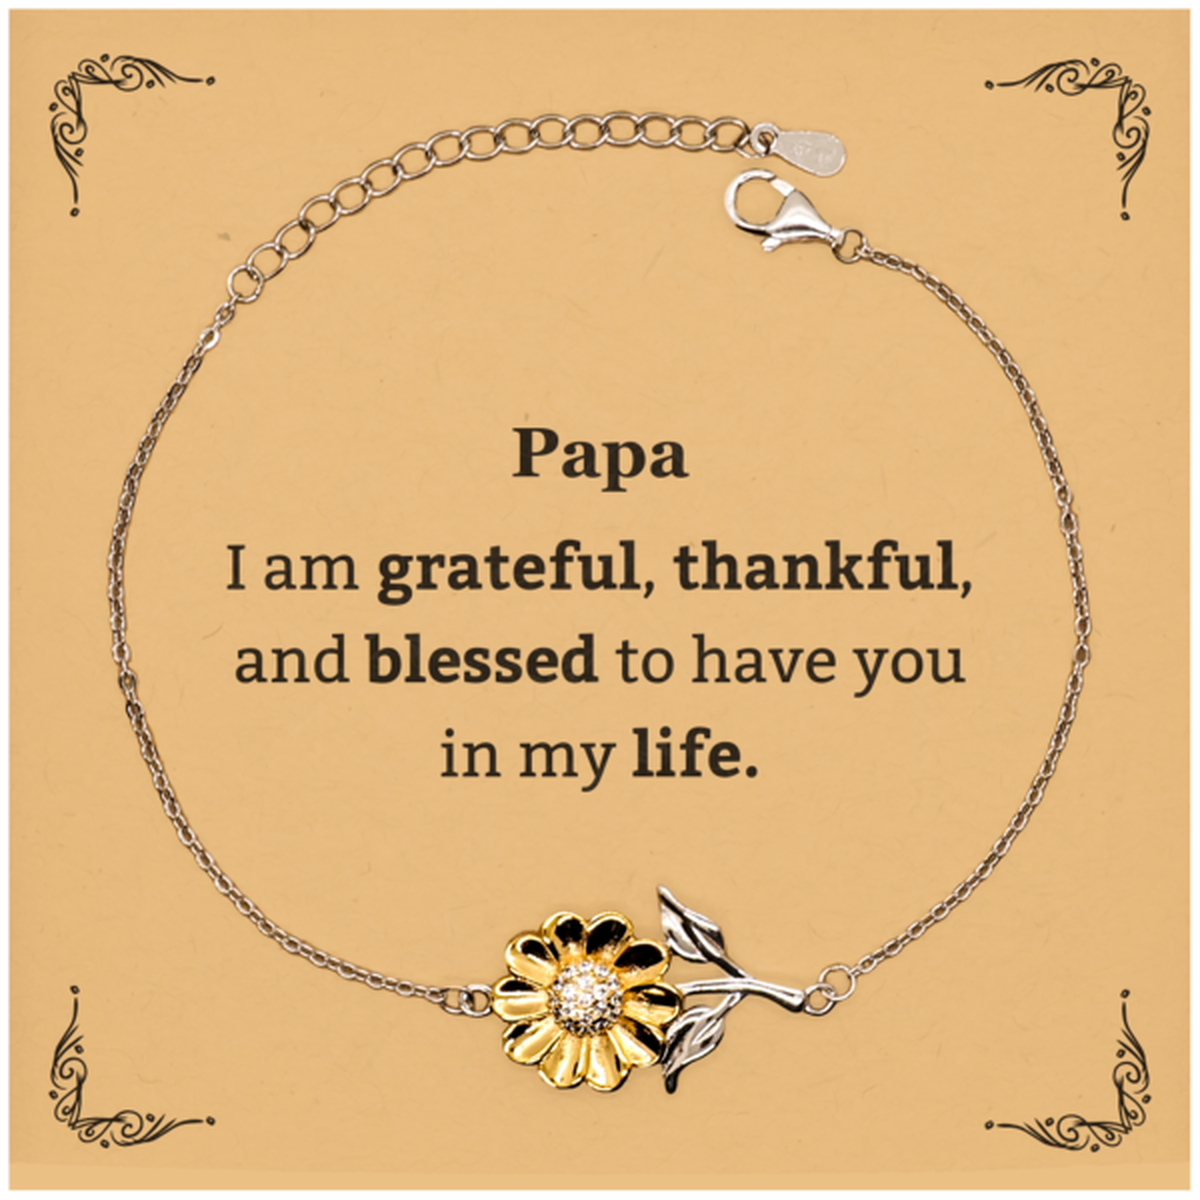 Papa Appreciation Gifts, I am grateful, thankful, and blessed, Thank You Sunflower Bracelet for Papa, Birthday Inspiration Gifts for Papa